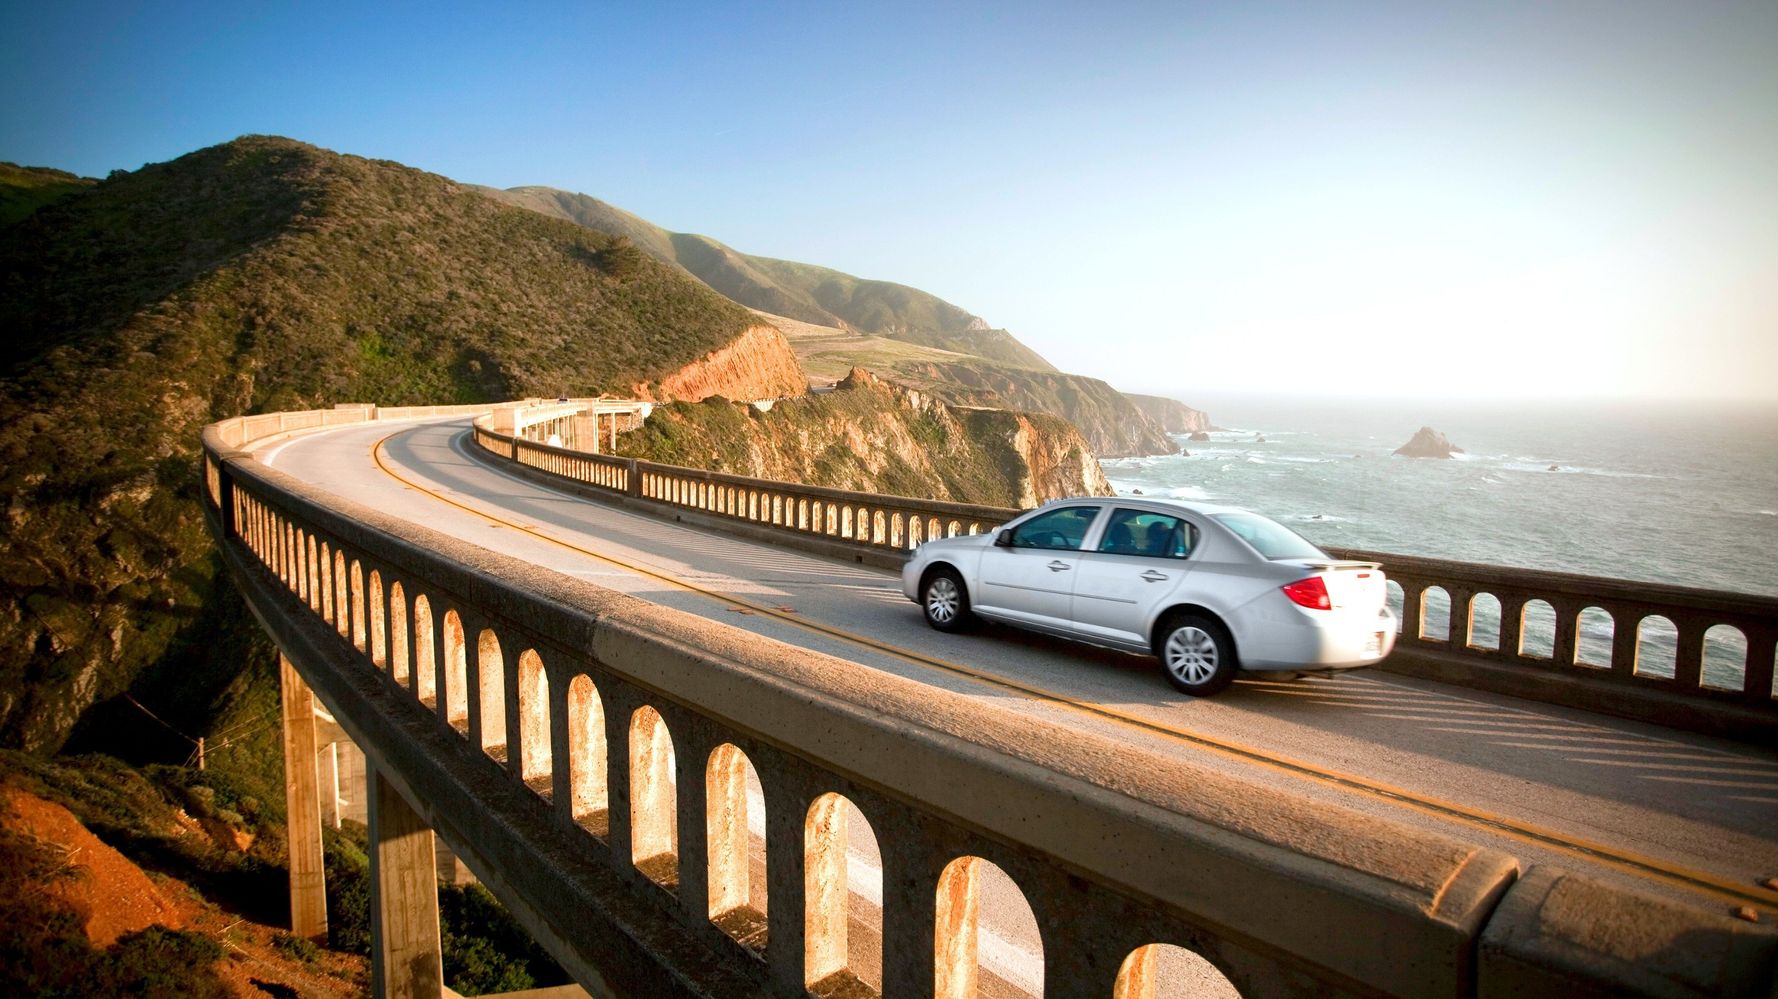 Comparison of Rental Car Deals to Find the Right One